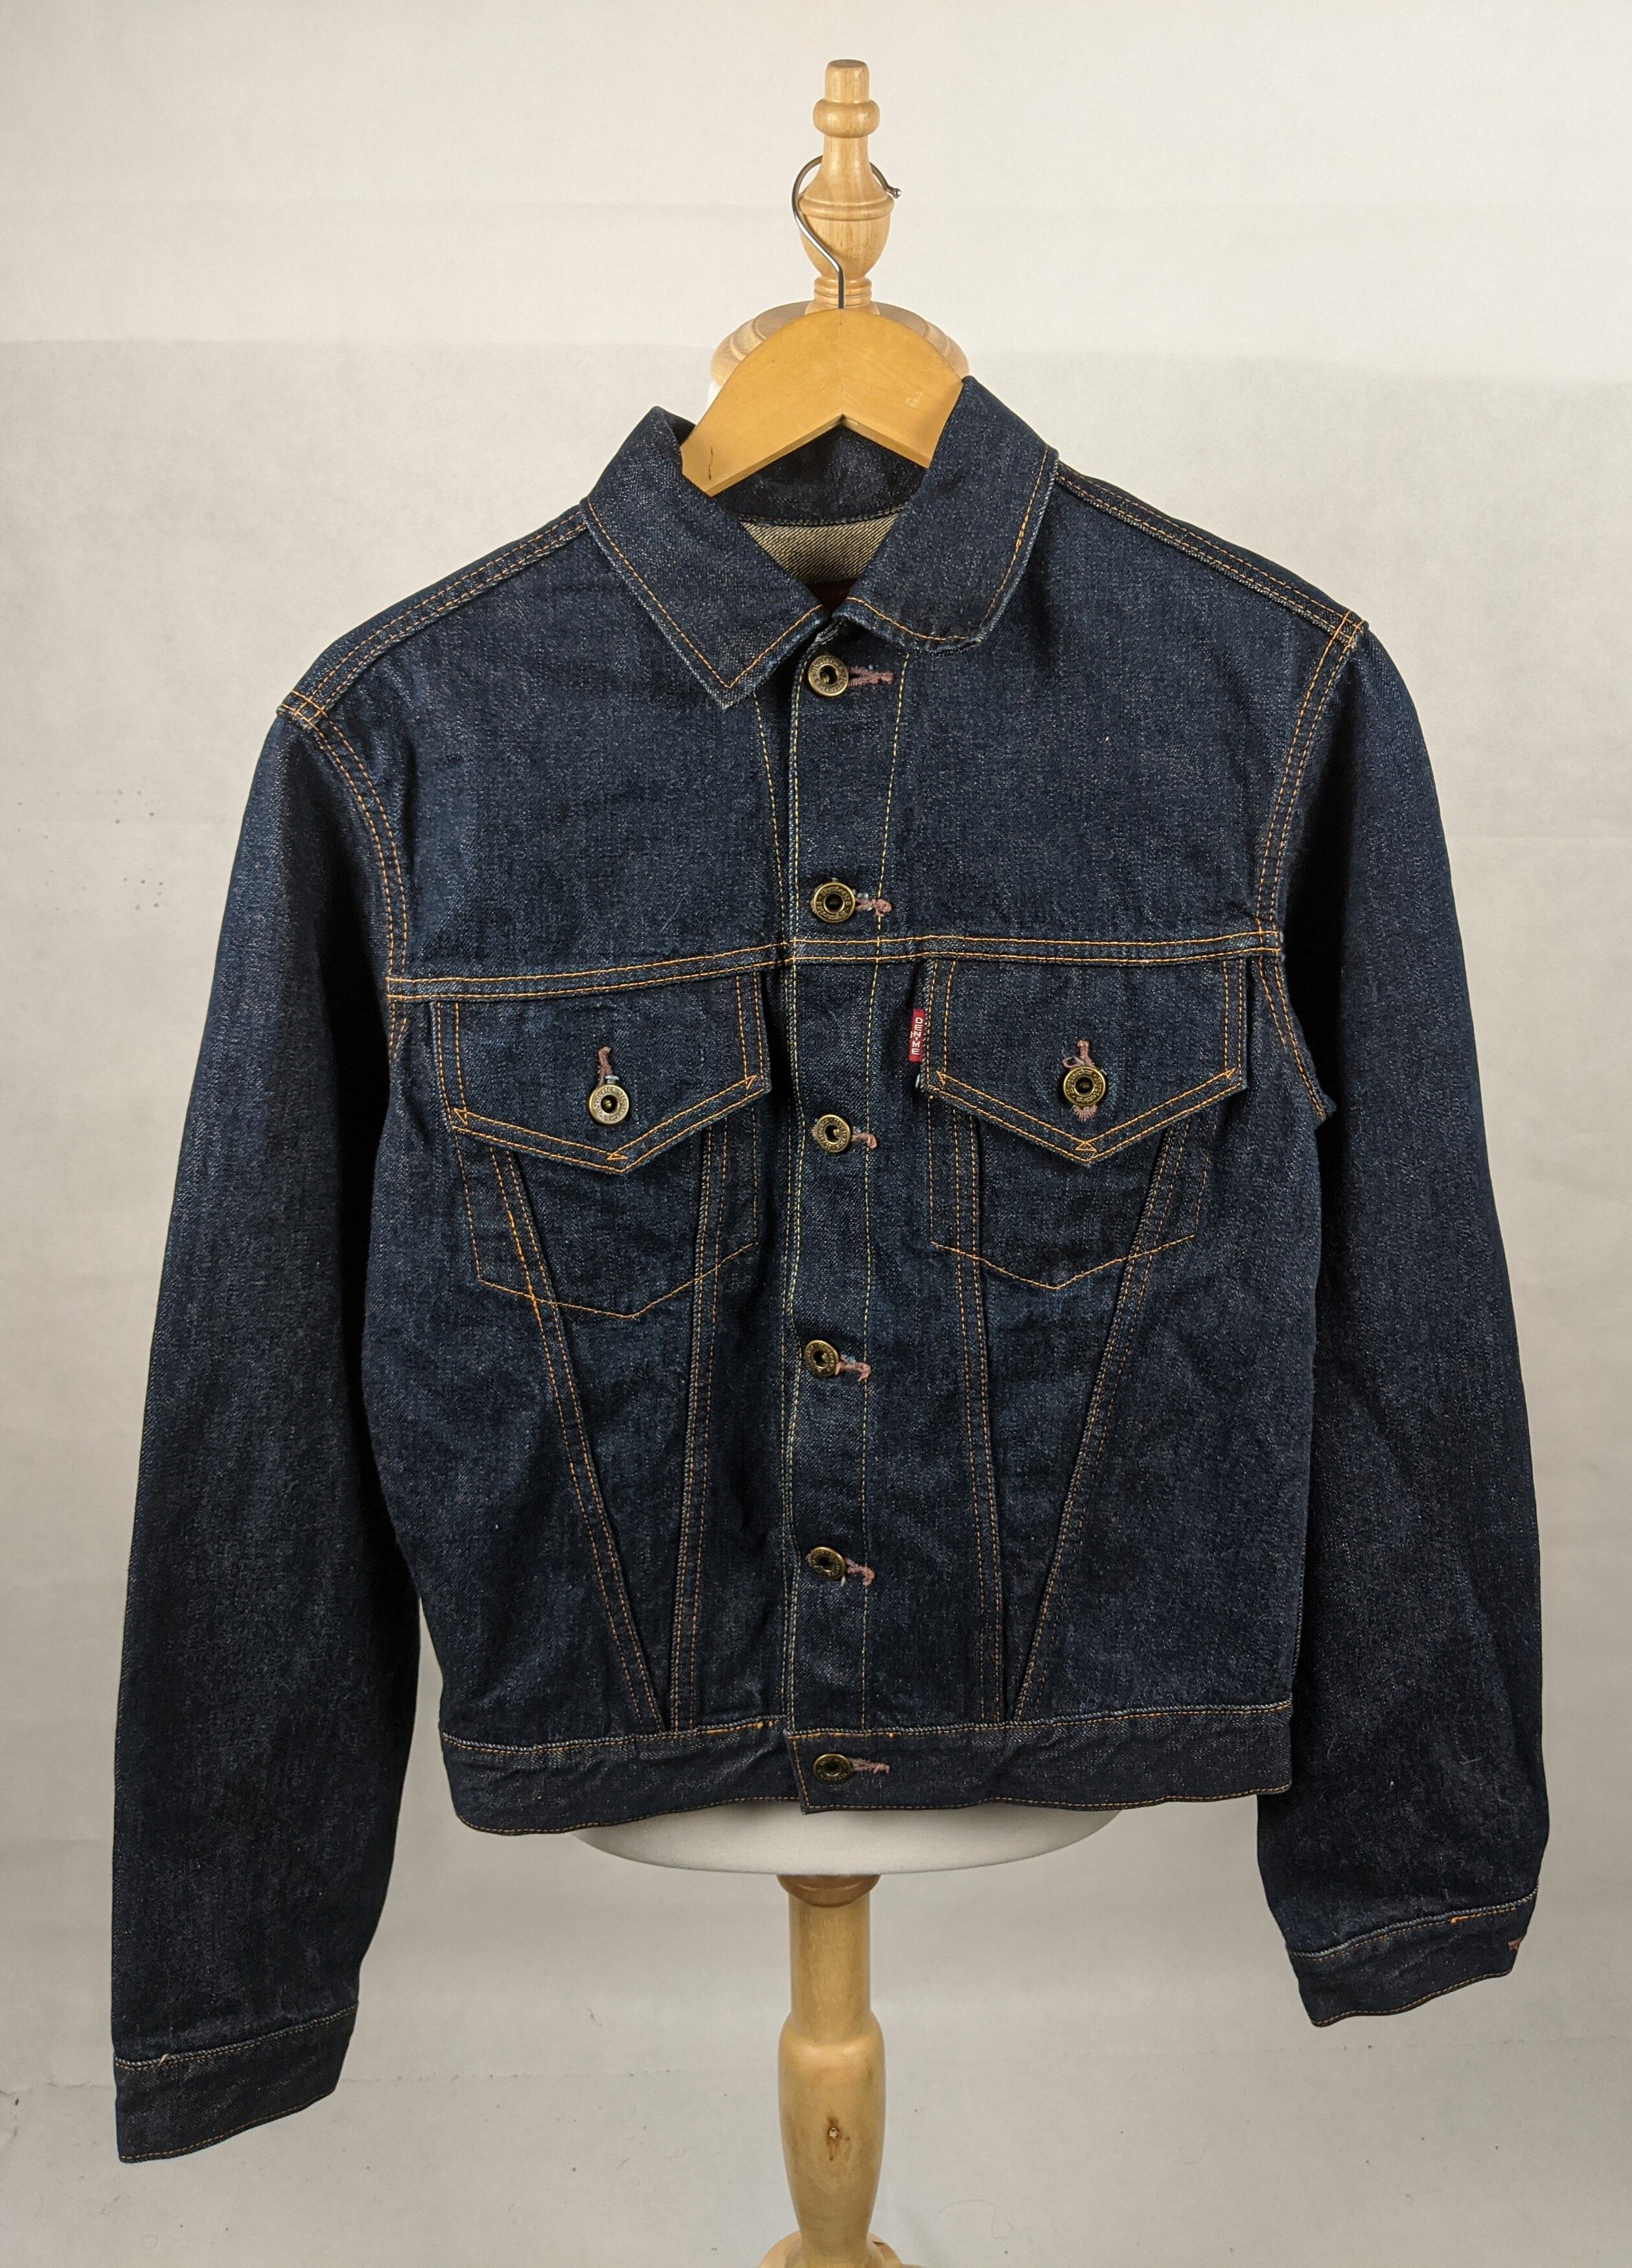 Denime Hysteric Kapital Buttonfly Jeans Jacket - 1